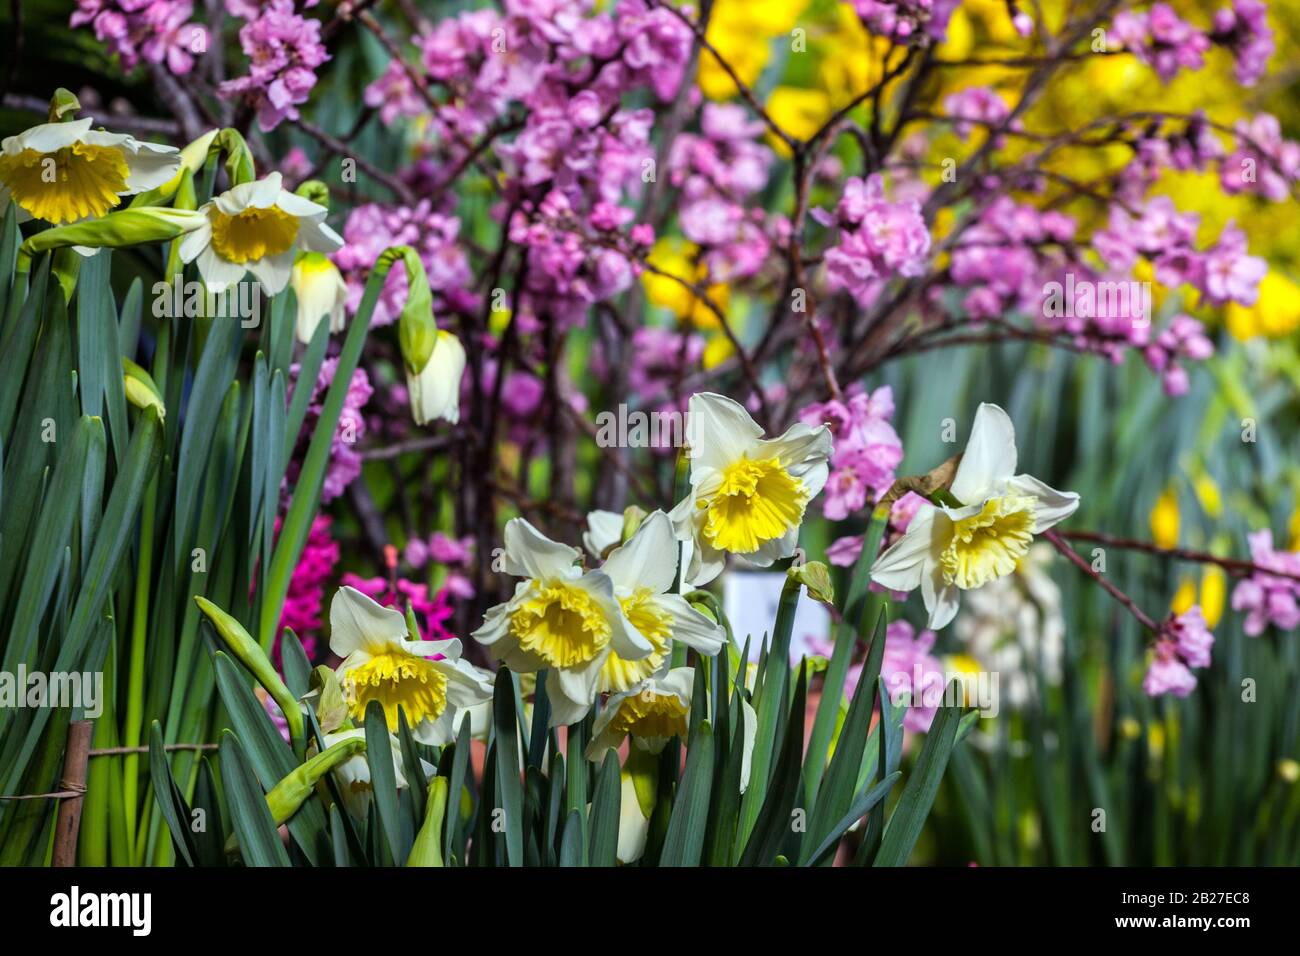 Garden spring colorful plants daffodils prunus blossoms Stock Photo